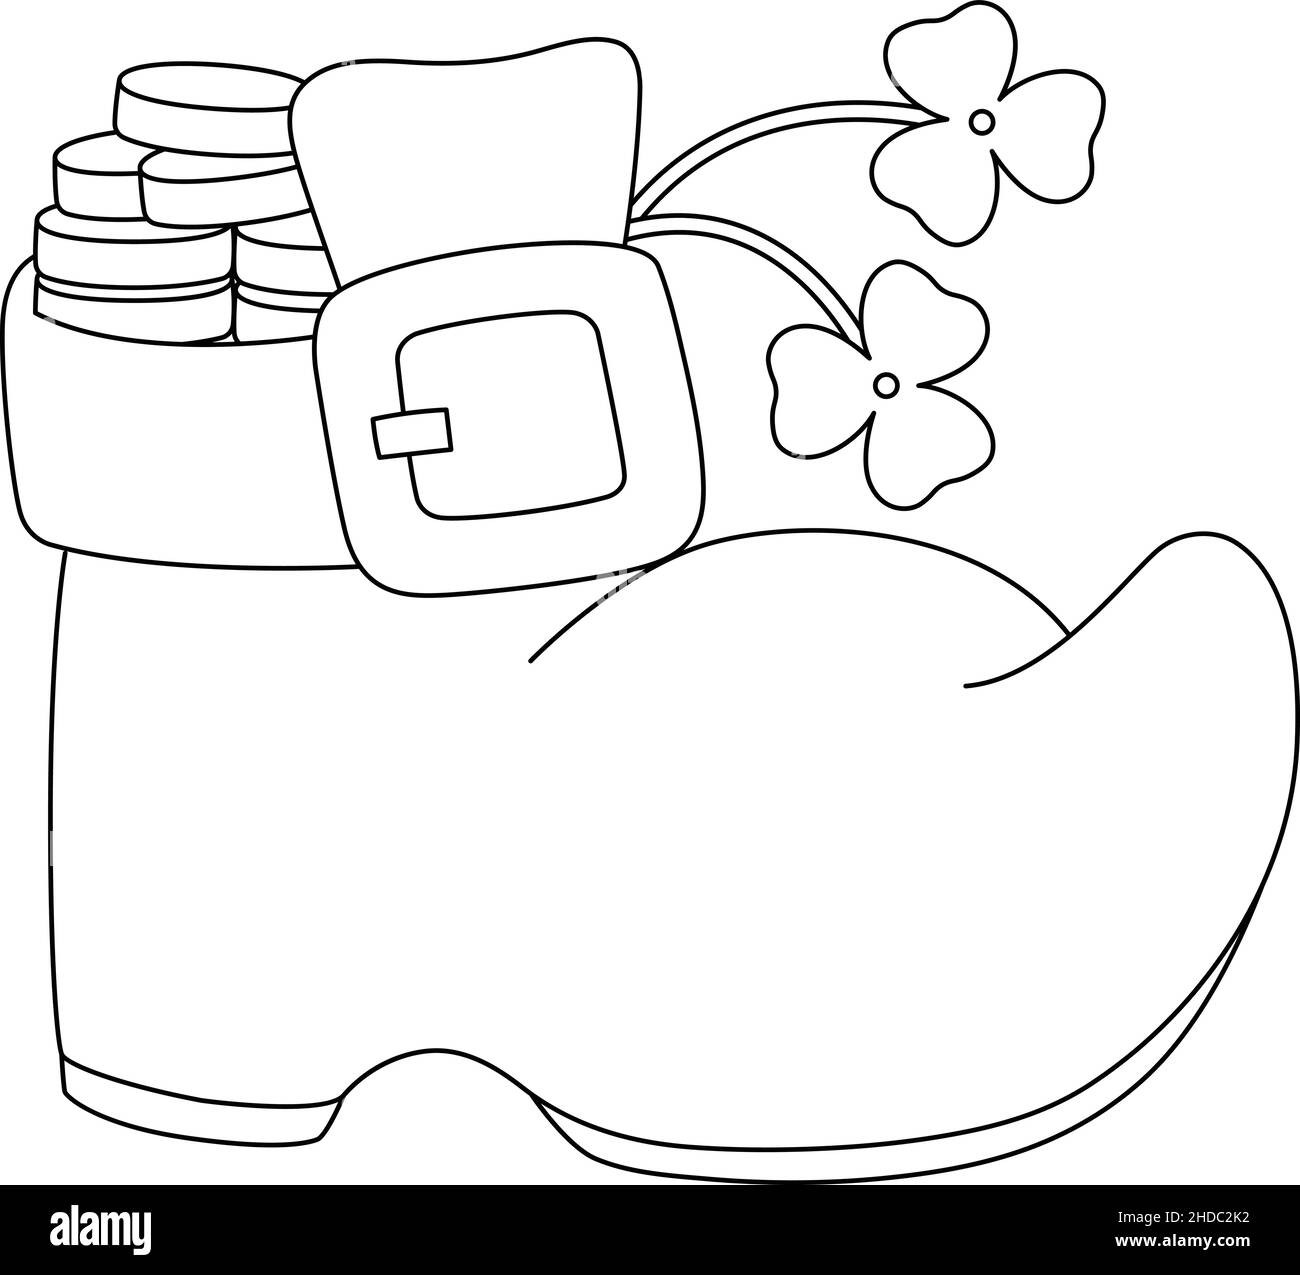 St. Patricks Day Shoe Coloring Page for Kids Stock Vector